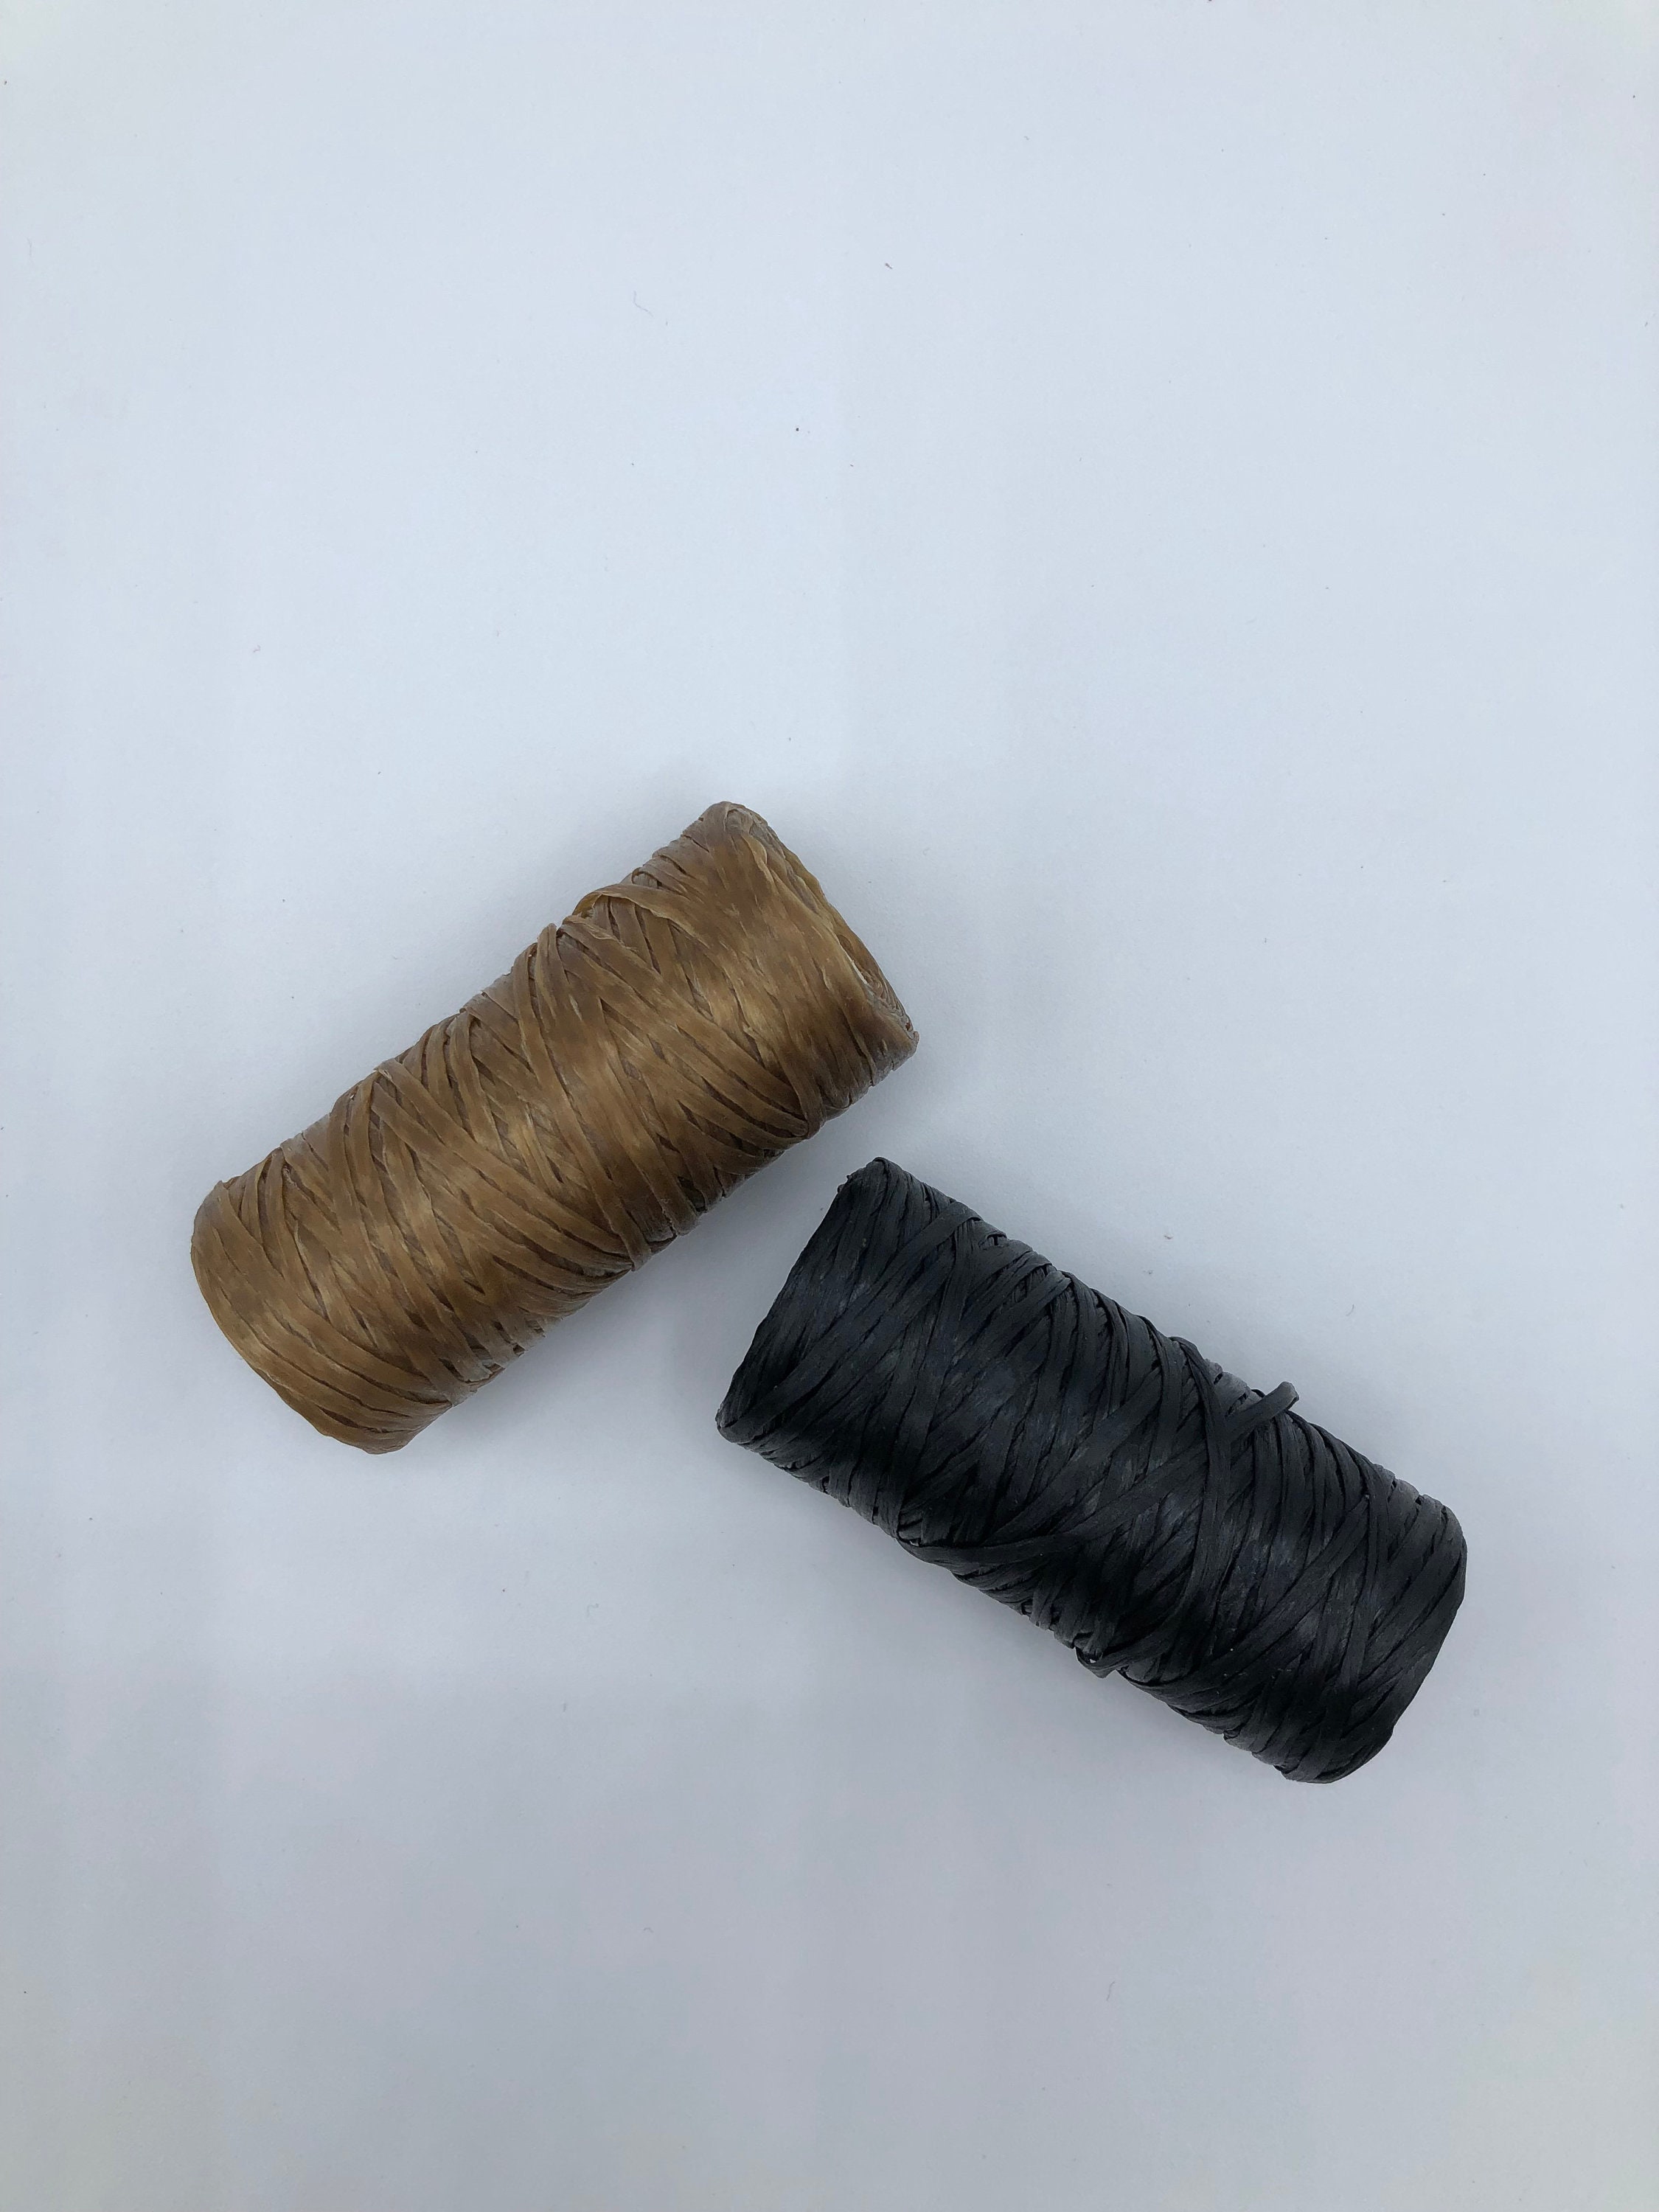 Artificial Sinew Waxed Nylon Thread Bolt Very Strong for Crafts